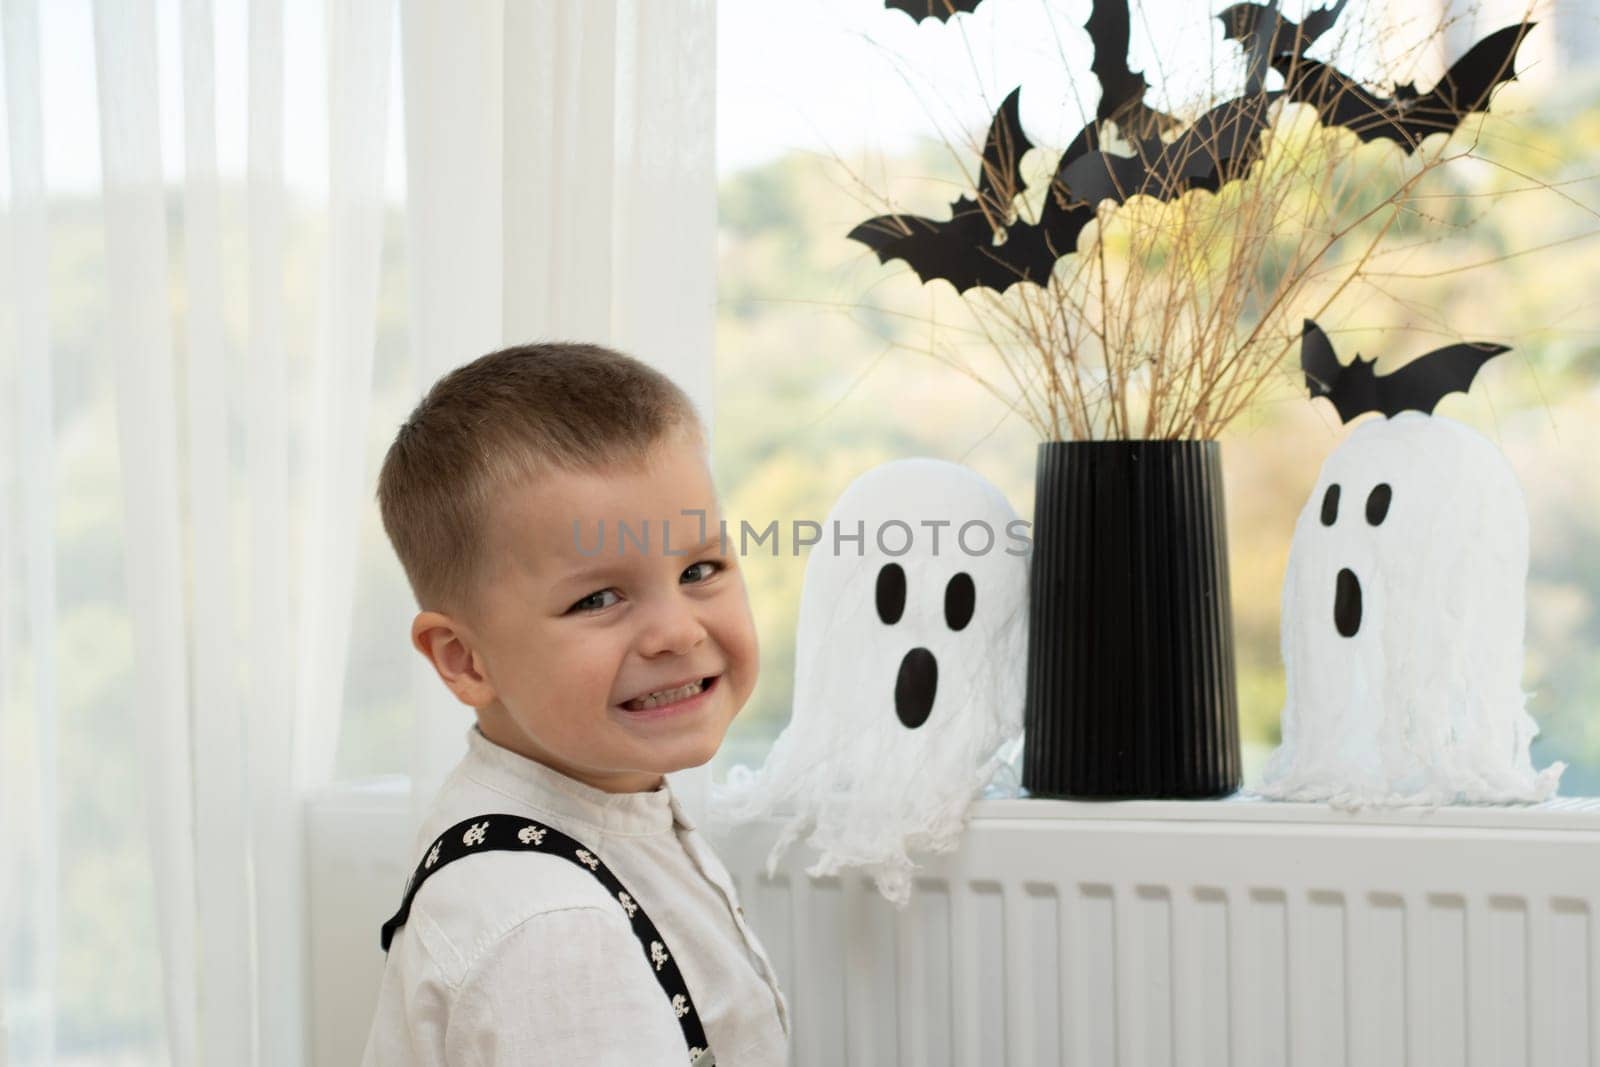 Halloween concept. A little boy, with emotional facial expressions, in a white shirt and black suspenders with images of skulls against the background of a window with a vase of dry branches and black paper bats. Close-up